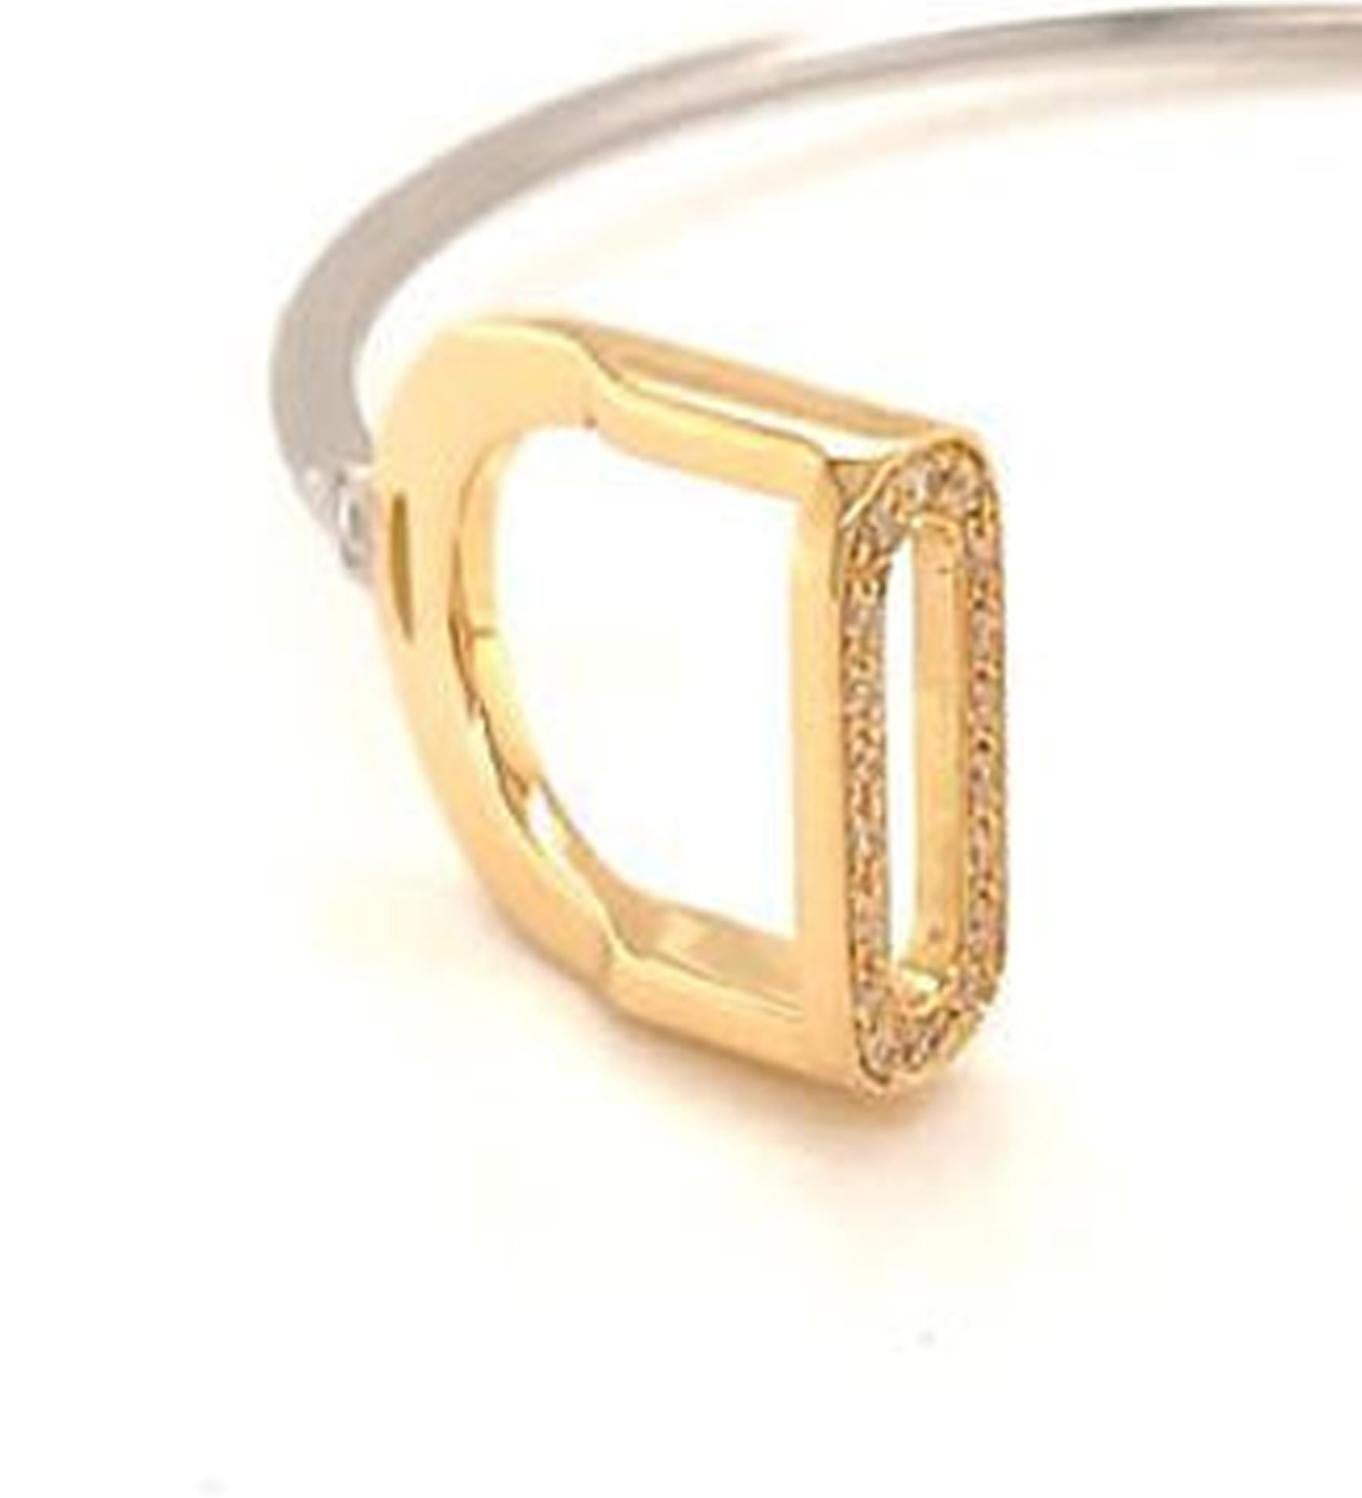 Garavelli 18 Karat Yellow and  White Gold  Bangle Bracelet from Staffe Collection, featuring white diamonds accent. Made in Valenza, Italy
Each Stirrup is 20 mm tall and  has one Diamond.
Bracelet size cm 17 or 6